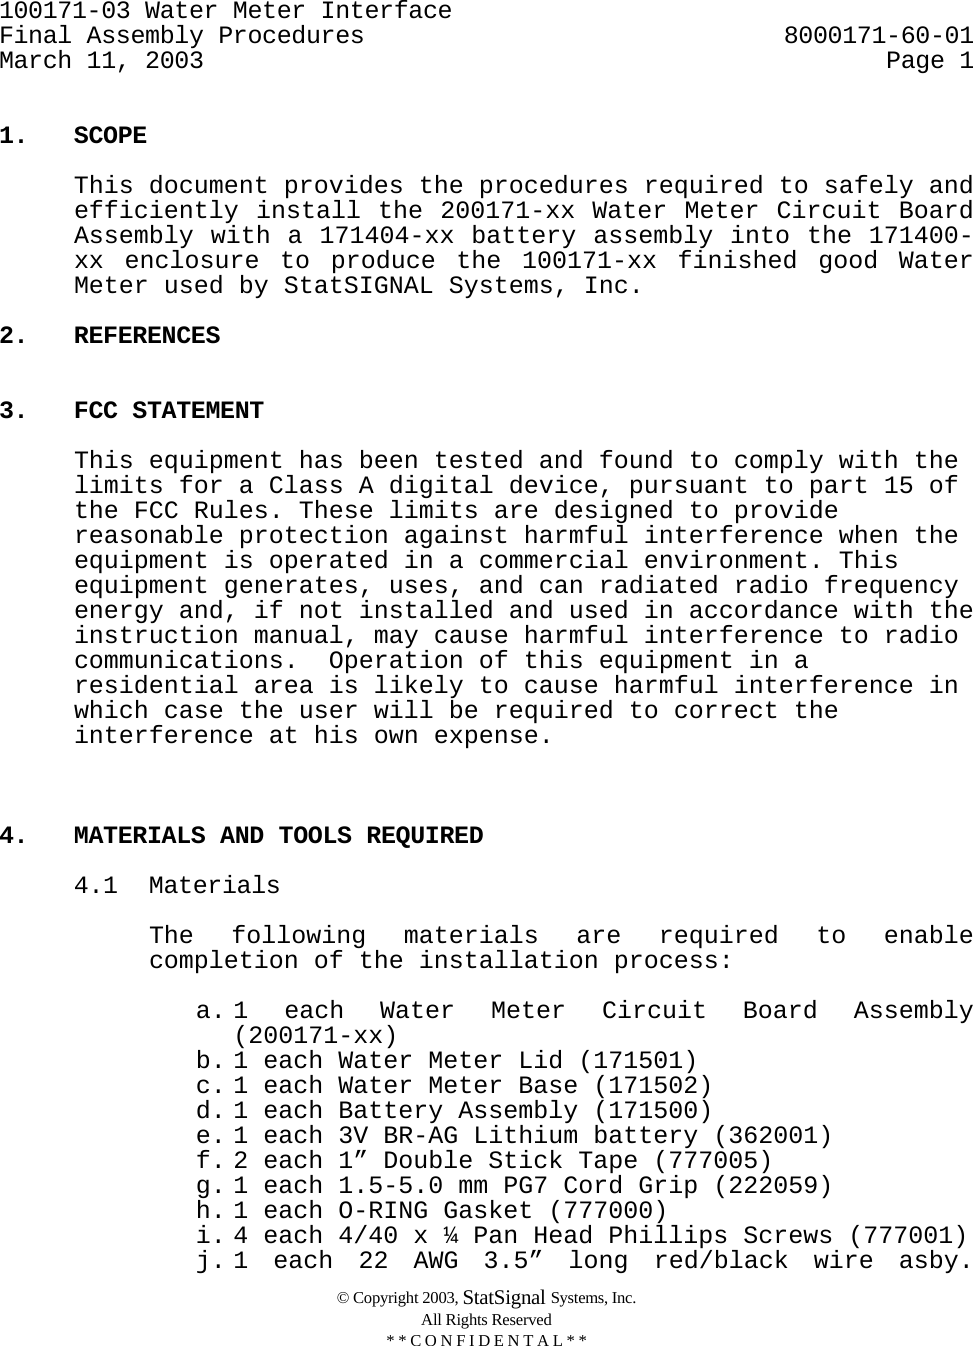 100171-03 Water Meter Interface     Final Assembly Procedures  8000171-60-01 March 11, 2003  Page 1  © Copyright 2003, StatSignal Systems, Inc. All Rights Reserved * * C O N F I D E N T A L * *  1. SCOPE    This document provides the procedures required to safely and efficiently install the 200171-xx Water Meter Circuit Board Assembly with a 171404-xx battery assembly into the 171400-xx enclosure to produce the 100171-xx finished good Water Meter used by StatSIGNAL Systems, Inc.  2. REFERENCES   3. FCC STATEMENT  This equipment has been tested and found to comply with the limits for a Class A digital device, pursuant to part 15 of the FCC Rules. These limits are designed to provide reasonable protection against harmful interference when the equipment is operated in a commercial environment. This equipment generates, uses, and can radiated radio frequency energy and, if not installed and used in accordance with the instruction manual, may cause harmful interference to radio communications.  Operation of this equipment in a residential area is likely to cause harmful interference in which case the user will be required to correct the interference at his own expense.    4.  MATERIALS AND TOOLS REQUIRED   4.1 Materials  The following materials are required to enable completion of the installation process:  a. 1 each Water Meter Circuit Board Assembly (200171-xx) b. 1 each Water Meter Lid (171501) c. 1 each Water Meter Base (171502) d. 1 each Battery Assembly (171500)  e. 1 each 3V BR-AG Lithium battery (362001) f. 2 each 1” Double Stick Tape (777005) g. 1 each 1.5-5.0 mm PG7 Cord Grip (222059) h. 1 each O-RING Gasket (777000)  i. 4 each 4/40 x ¼ Pan Head Phillips Screws (777001) j. 1 each 22 AWG 3.5” long red/black wire asby. 